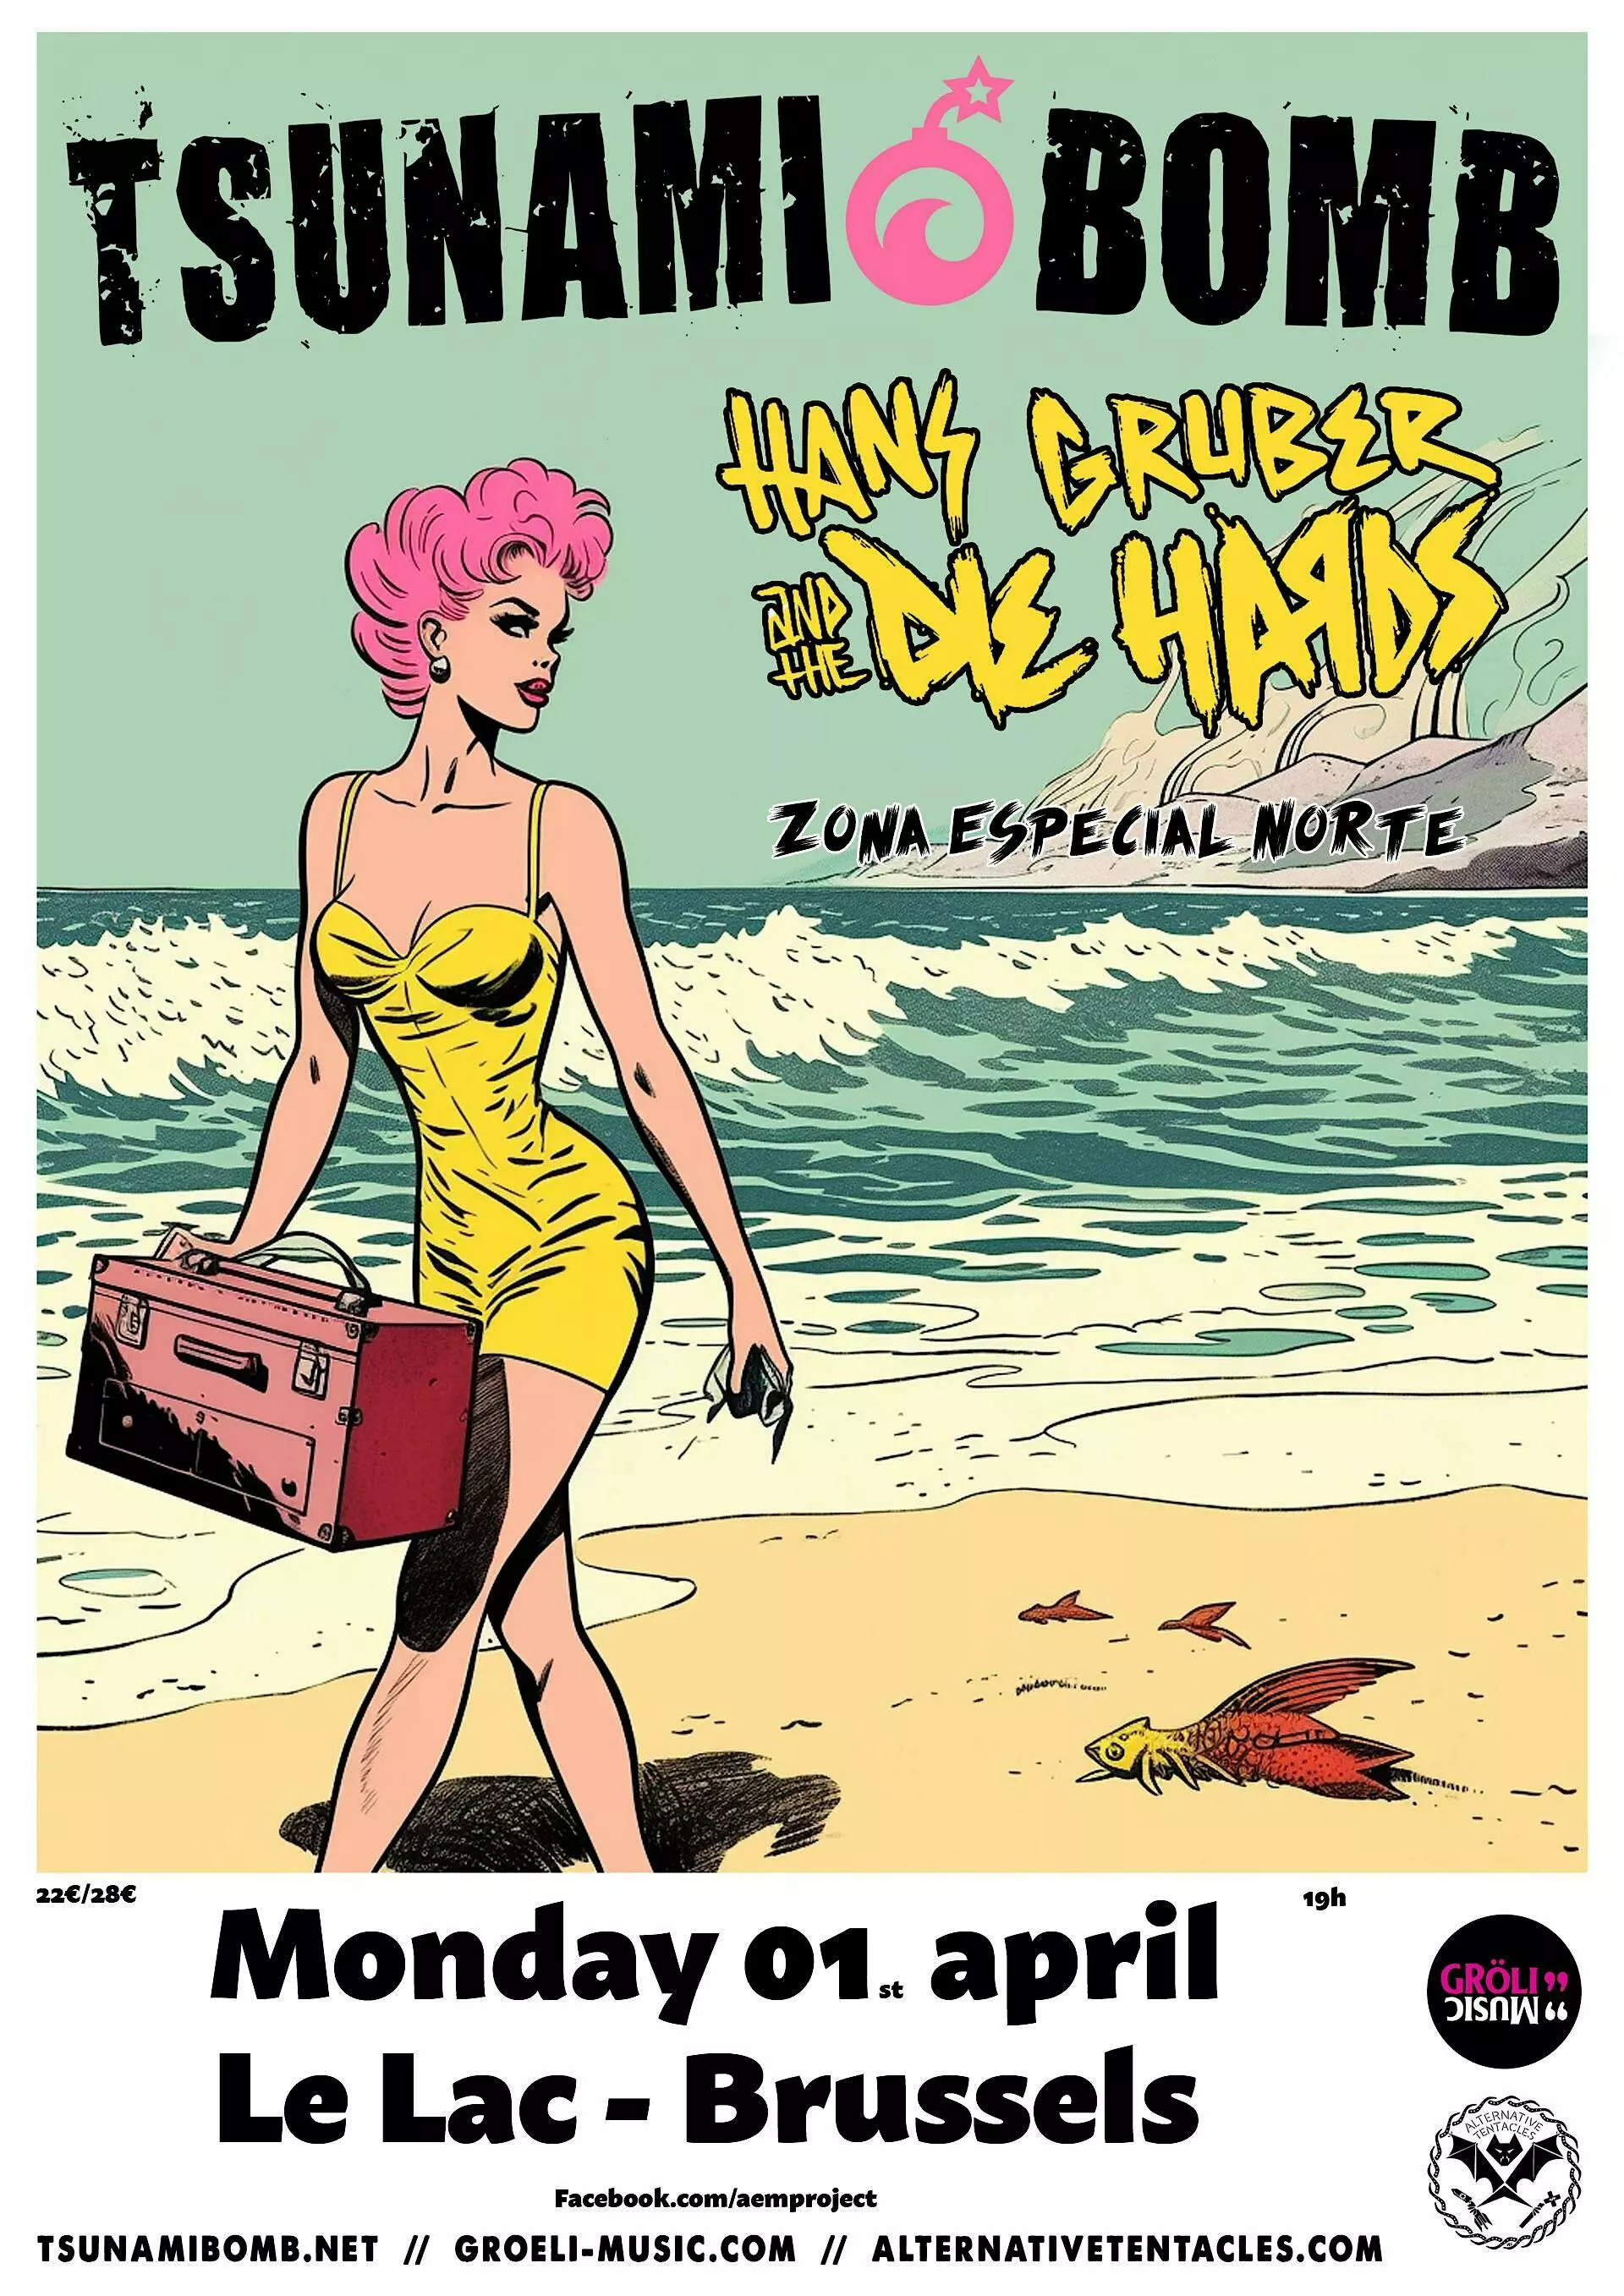 Concerts-Tsunami Bomb + Hans Gruber And The Die Hards + Zone Especial Norte